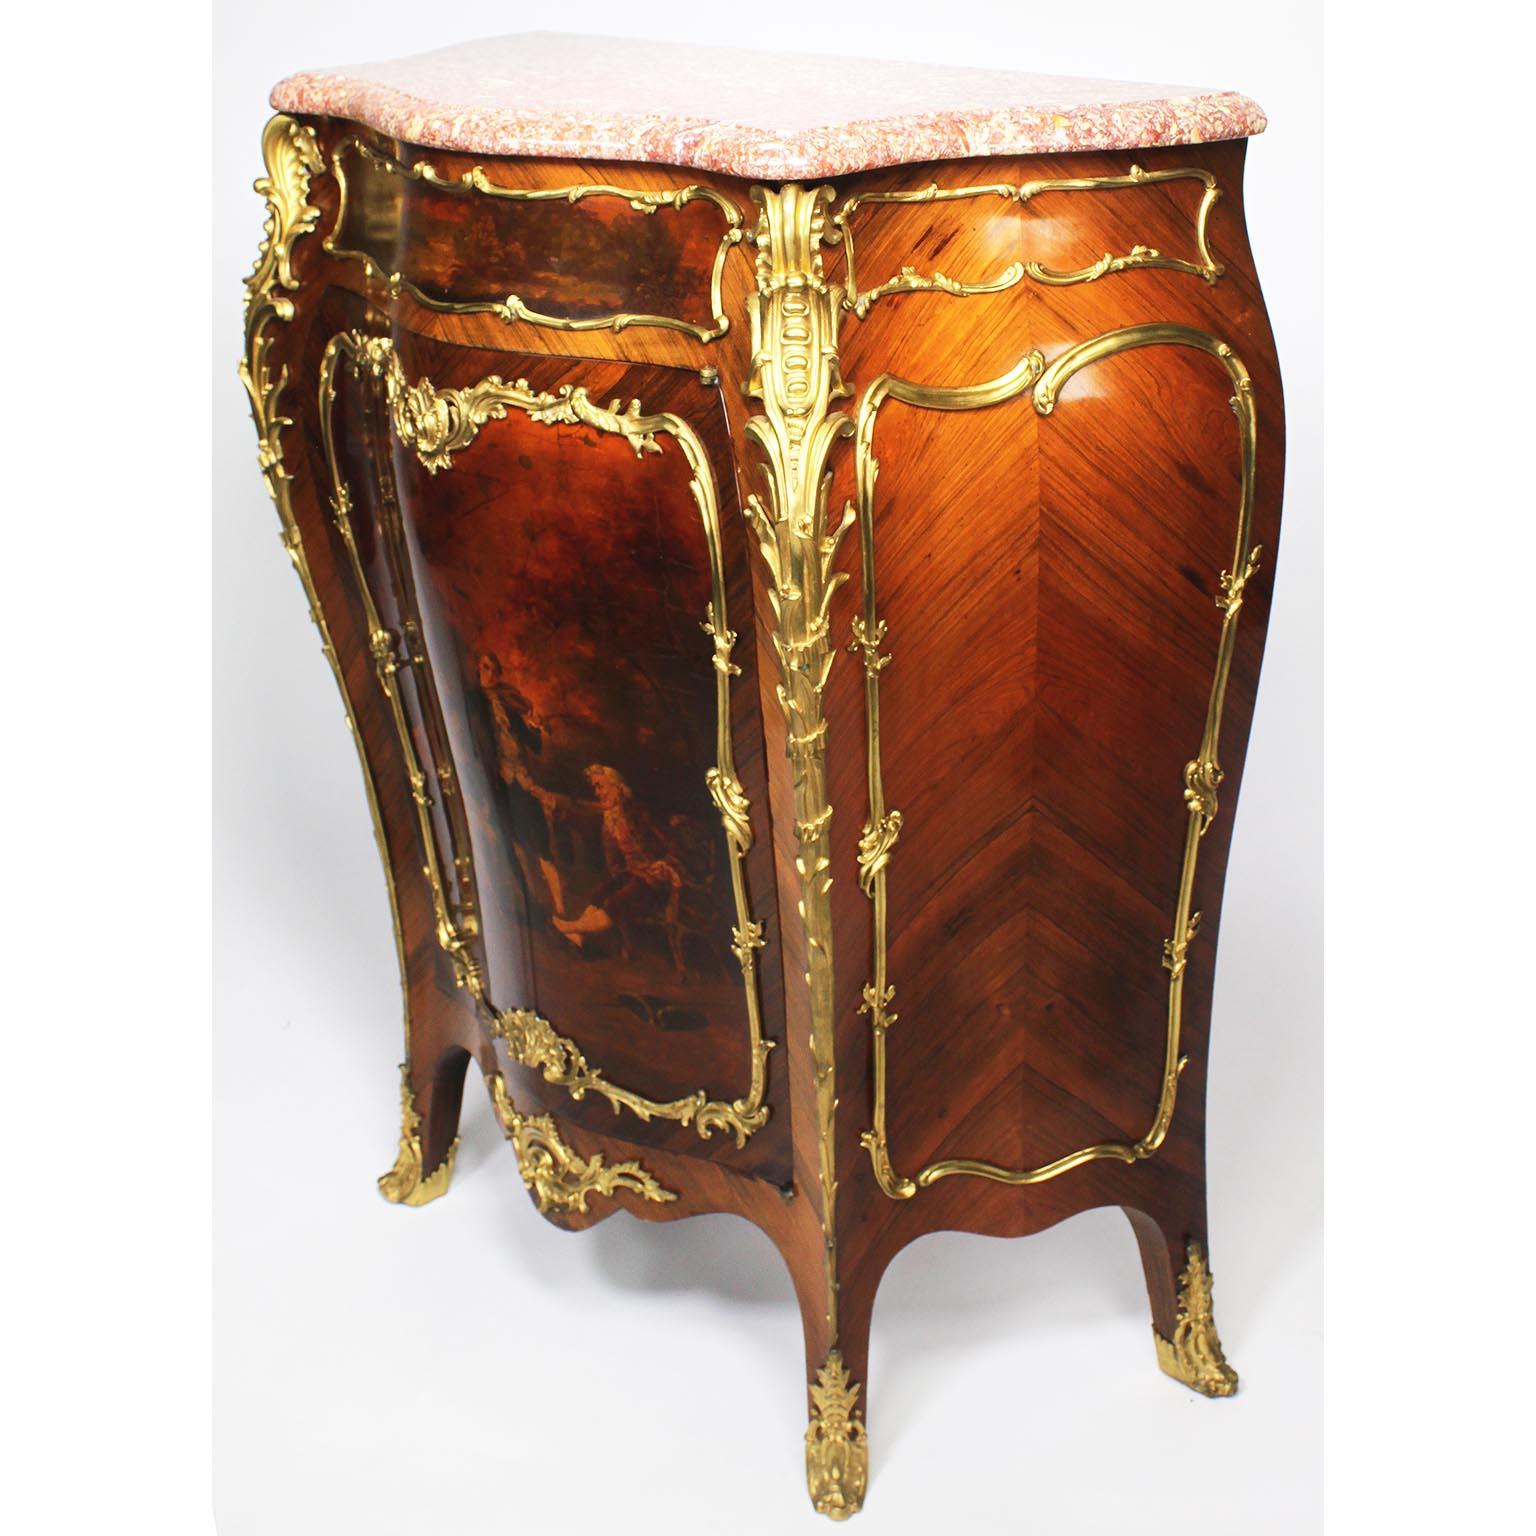 A Fine French 19th Century Louis XV Style Kingwood and Tulpwood Gilt-Bronze Mounted Vernis Martin Style Serpentine Meuble d'Appui (Side cabinet) with Marble Top. The triple-bombé single door body fitted with a Spanish Brocatelle marble top, the